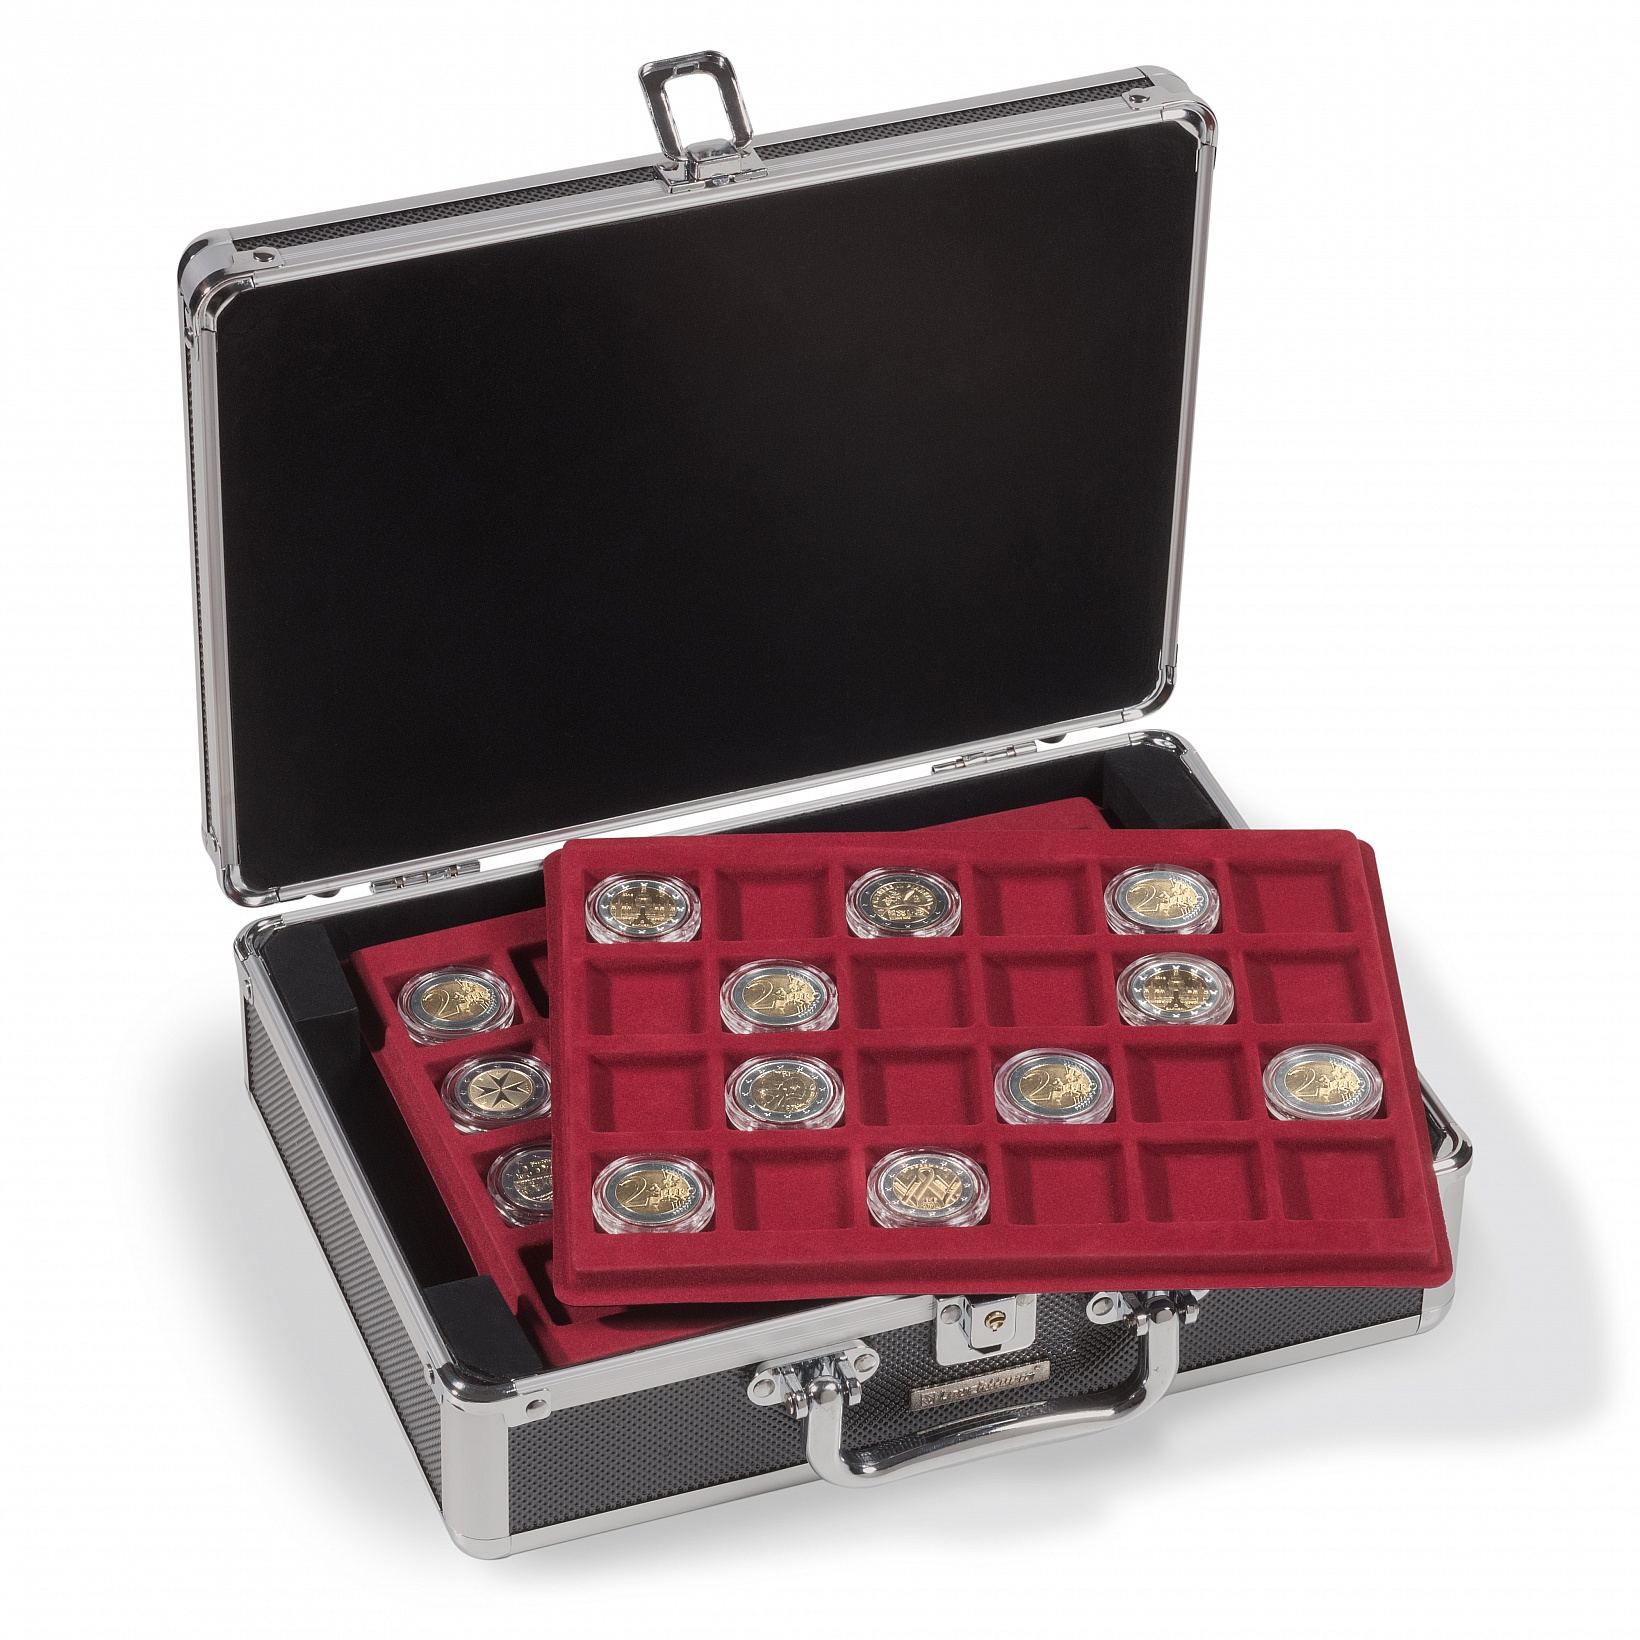 coin-case-cargo-s6-for-144-2-euro-coins-in-capsules-black-silver